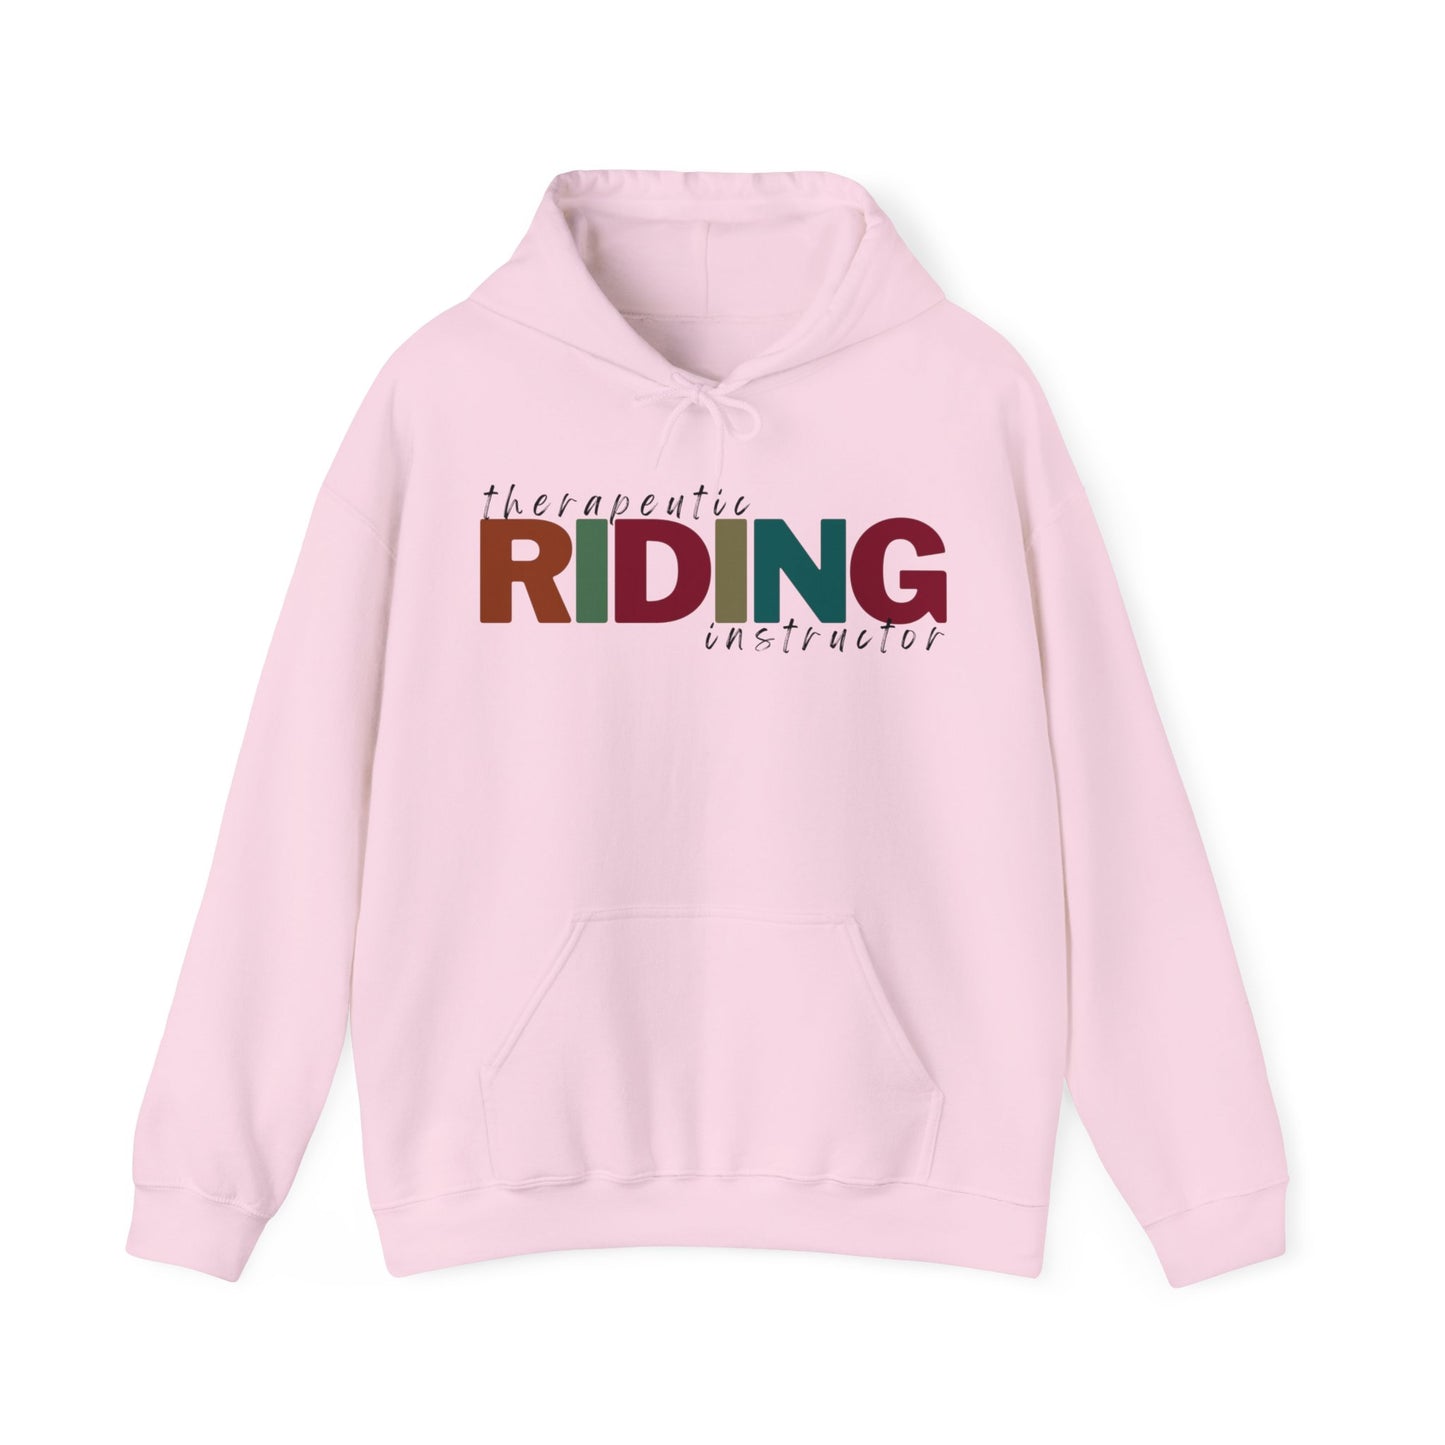 Therapeutic Riding Instructor hoodie- unisex fit hooded sweatshirt